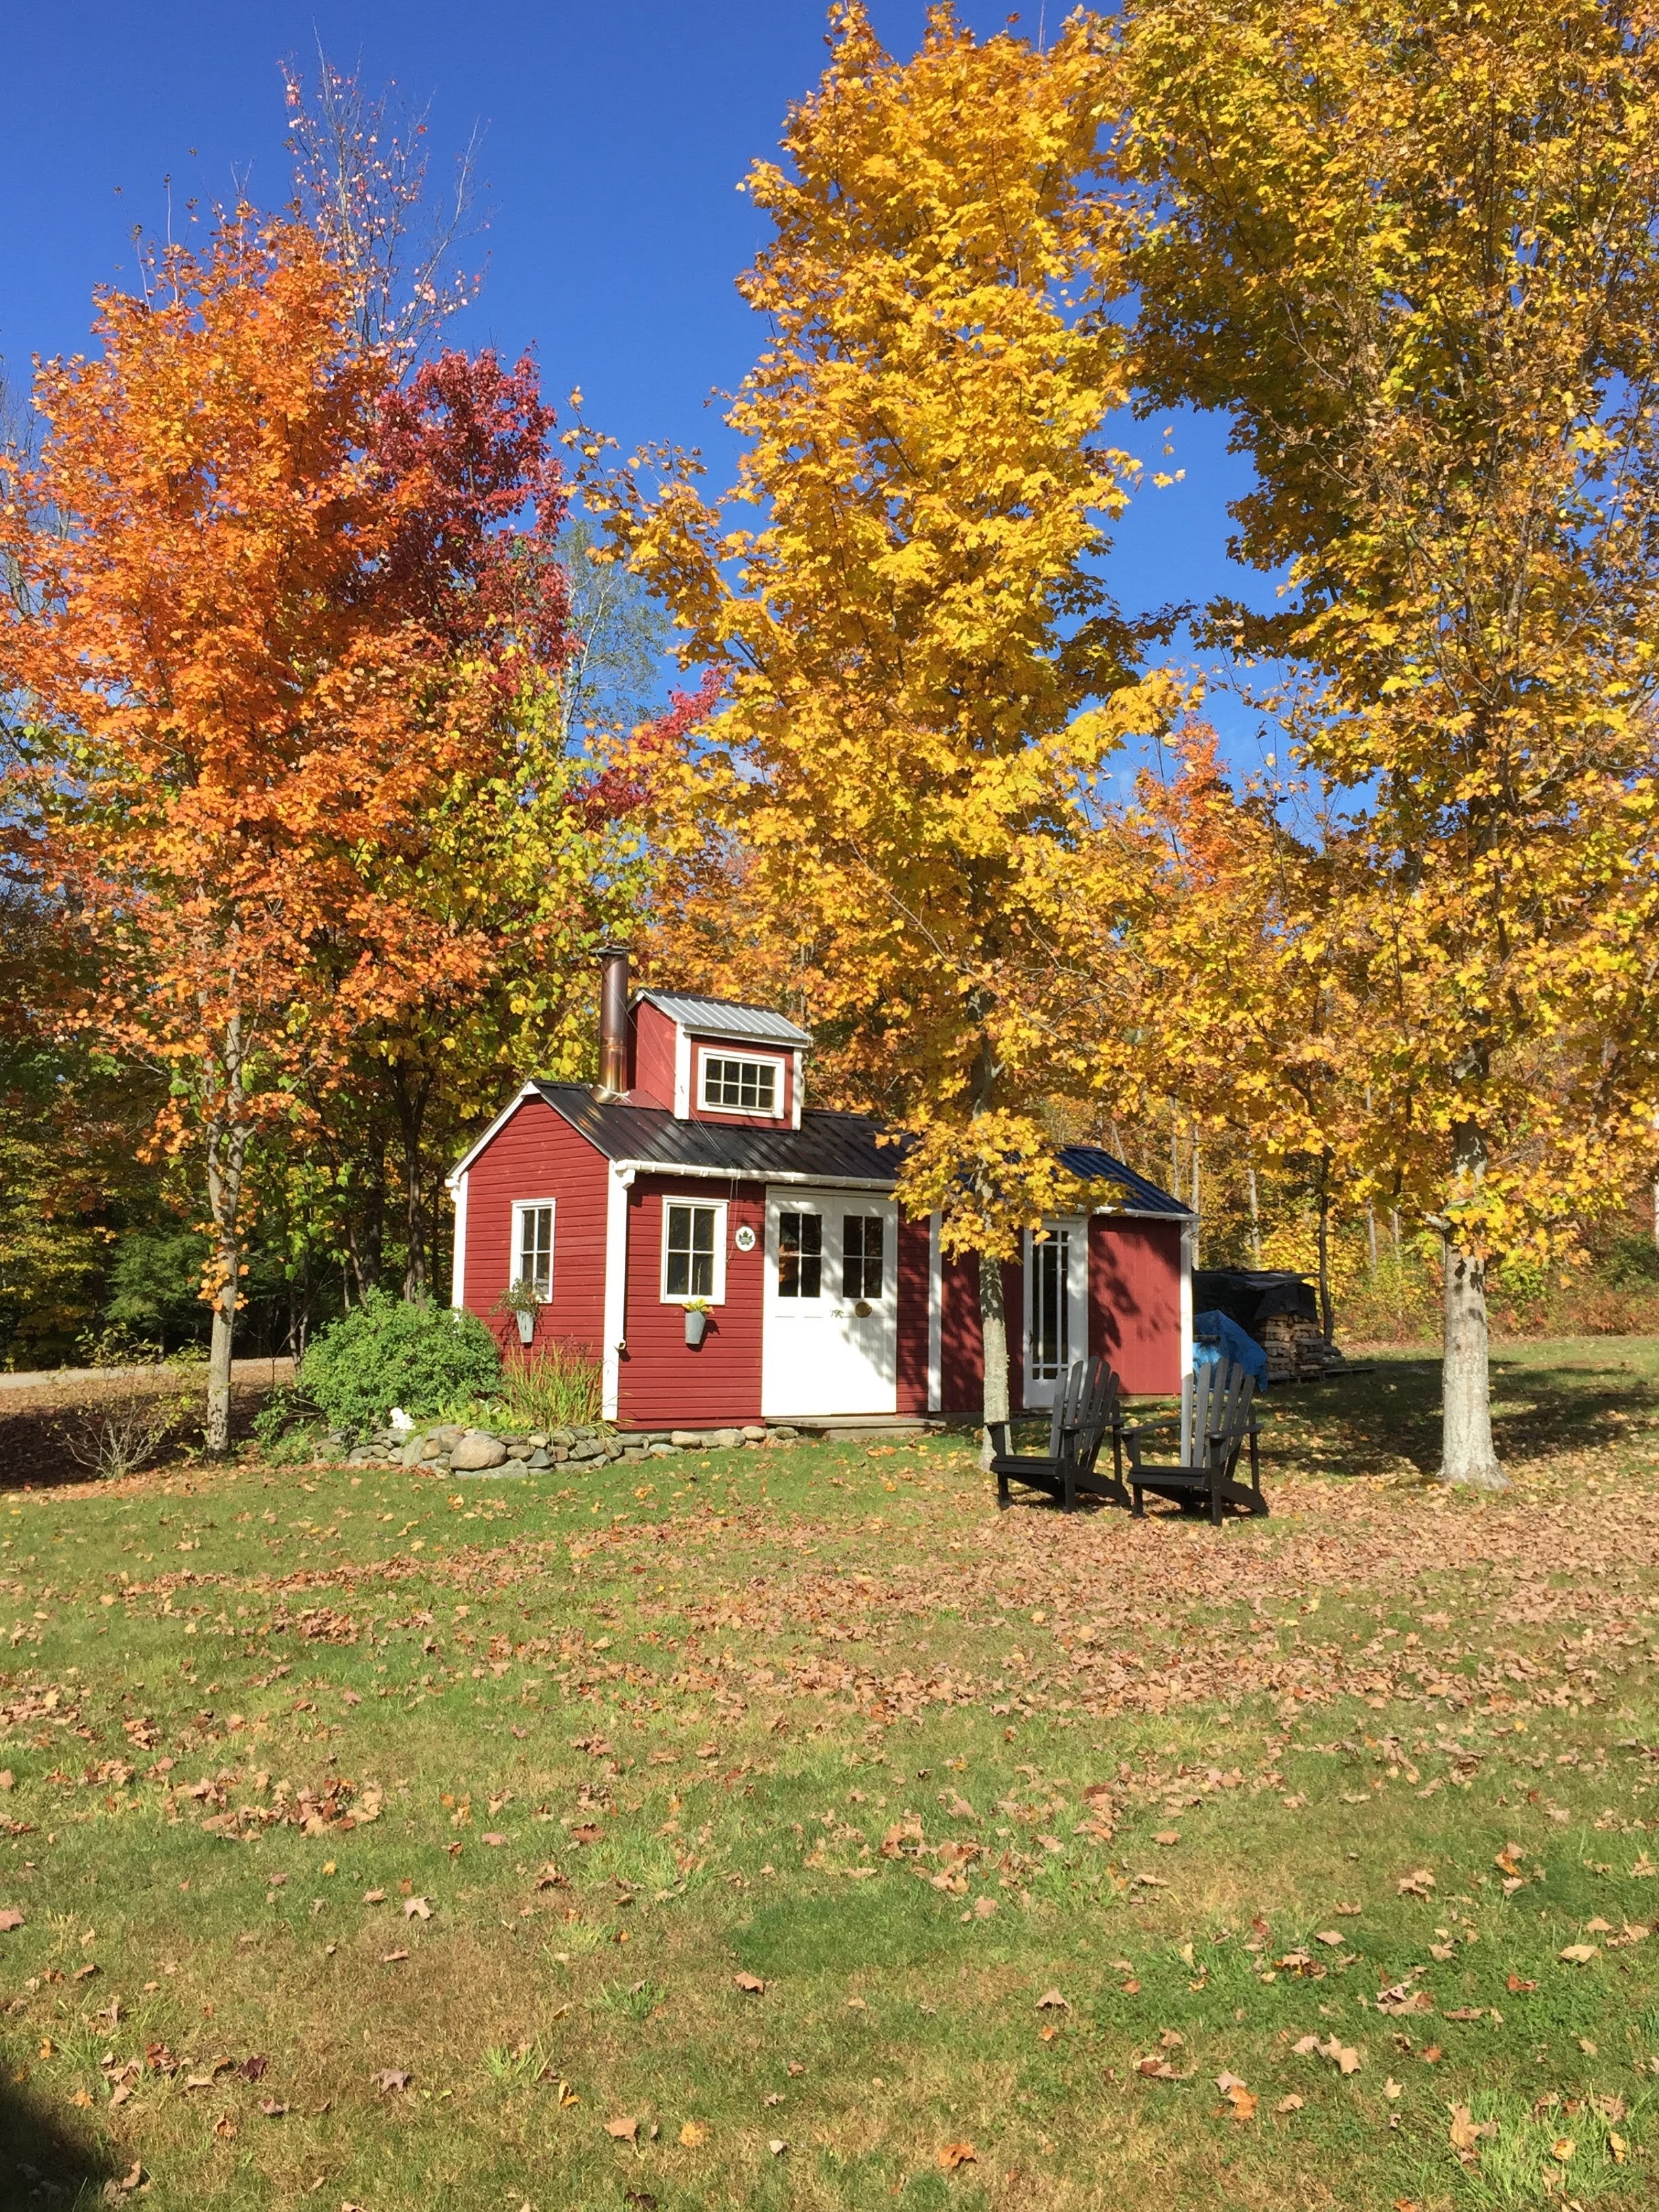   Fall colors light up beside this sugar shack on Ring Road. Photo by Dennis Plante  